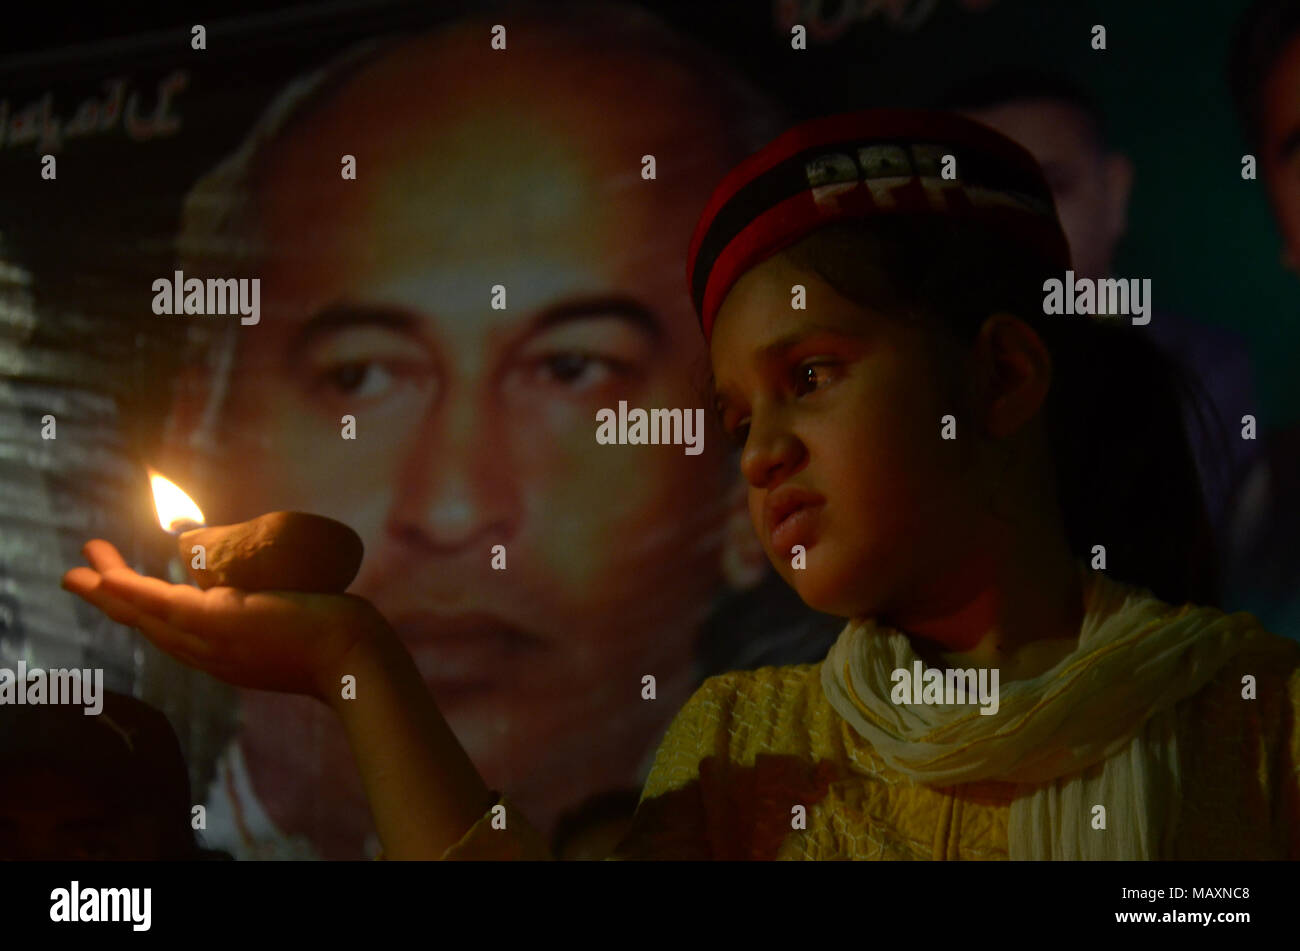 Pakistani workers of Peoples' Party (PPP) are offering dua for Shaheed Zulfiqar Ali Bhutto on the occasion of his martyrdom 39th death anniversary at Chairing Cross. in Lahore on April 03, 2018. Zulfikar Ali Bhutto I (5 January 1928 - 4 April 1979) was a Pakistani politician who served as Prime Minister of Pakistan from 1973 to 1977, and prior to that as the fourth President of Pakistan from 1971 to 1973. He is revered by his followers in Pakistan as Quaid-i-Awam He was also the founder of the Pakistan People's Party (PPP) and served as its chairman until his execution in 1979. (Photo by Rana Stock Photo